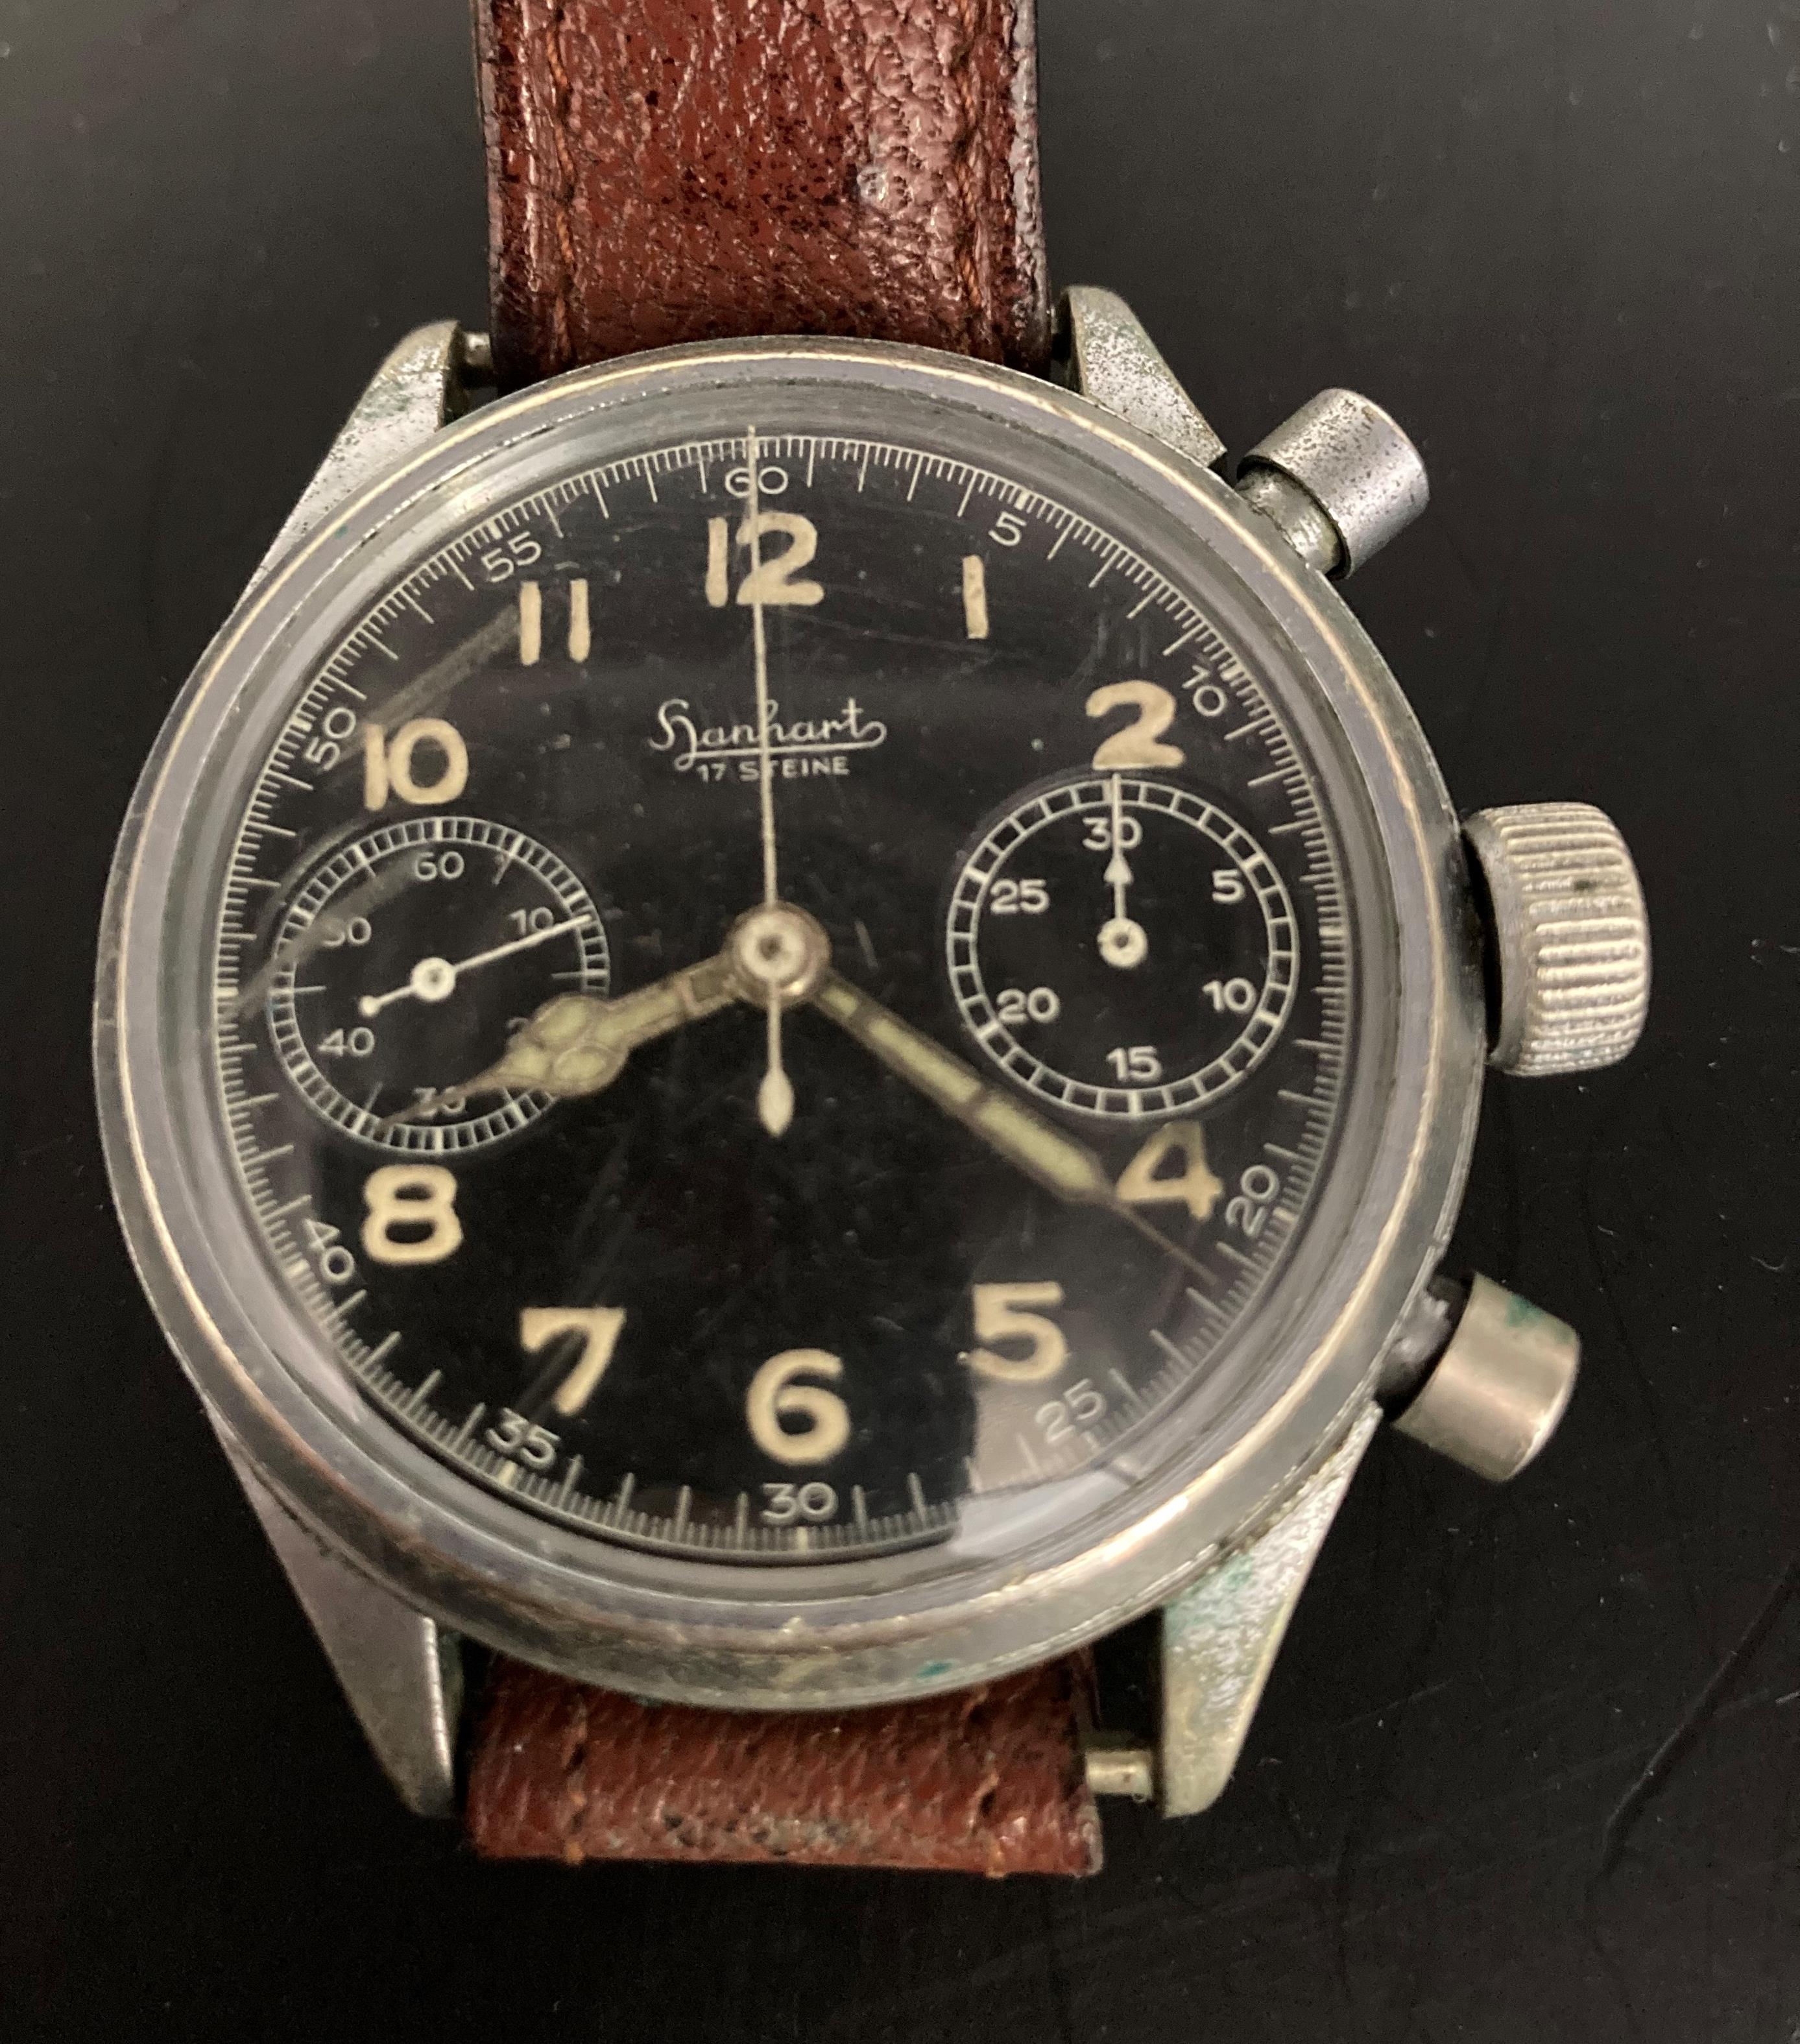 A Hanharts World War II Luftwaffe pilots chronograph with black face and brown leather strap